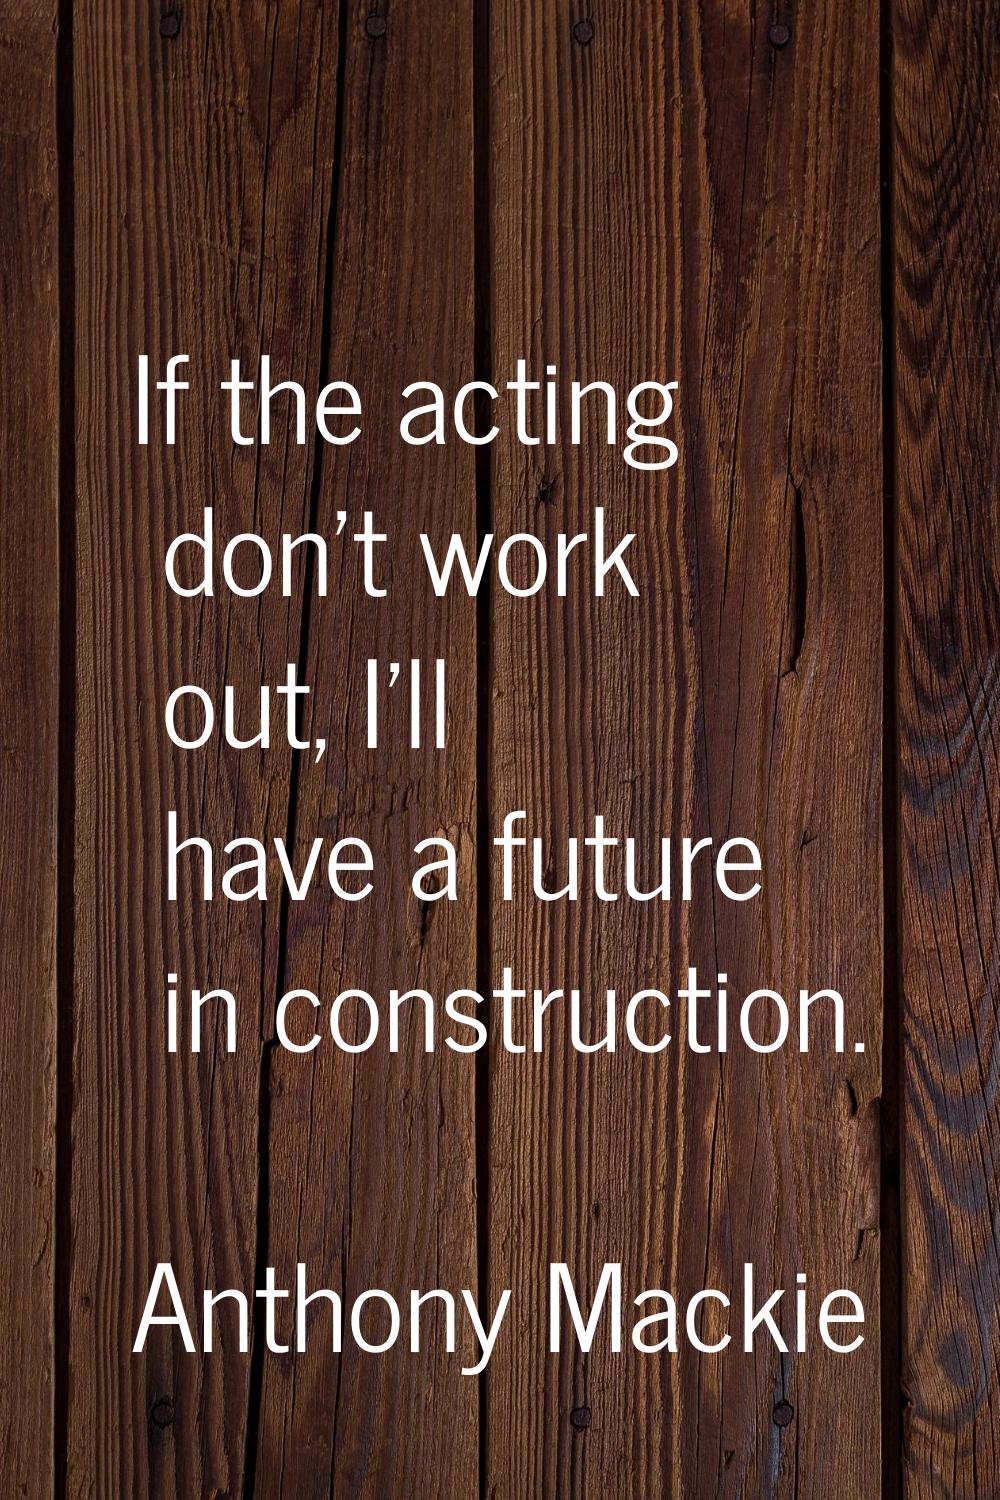 If the acting don't work out, I'll have a future in construction.